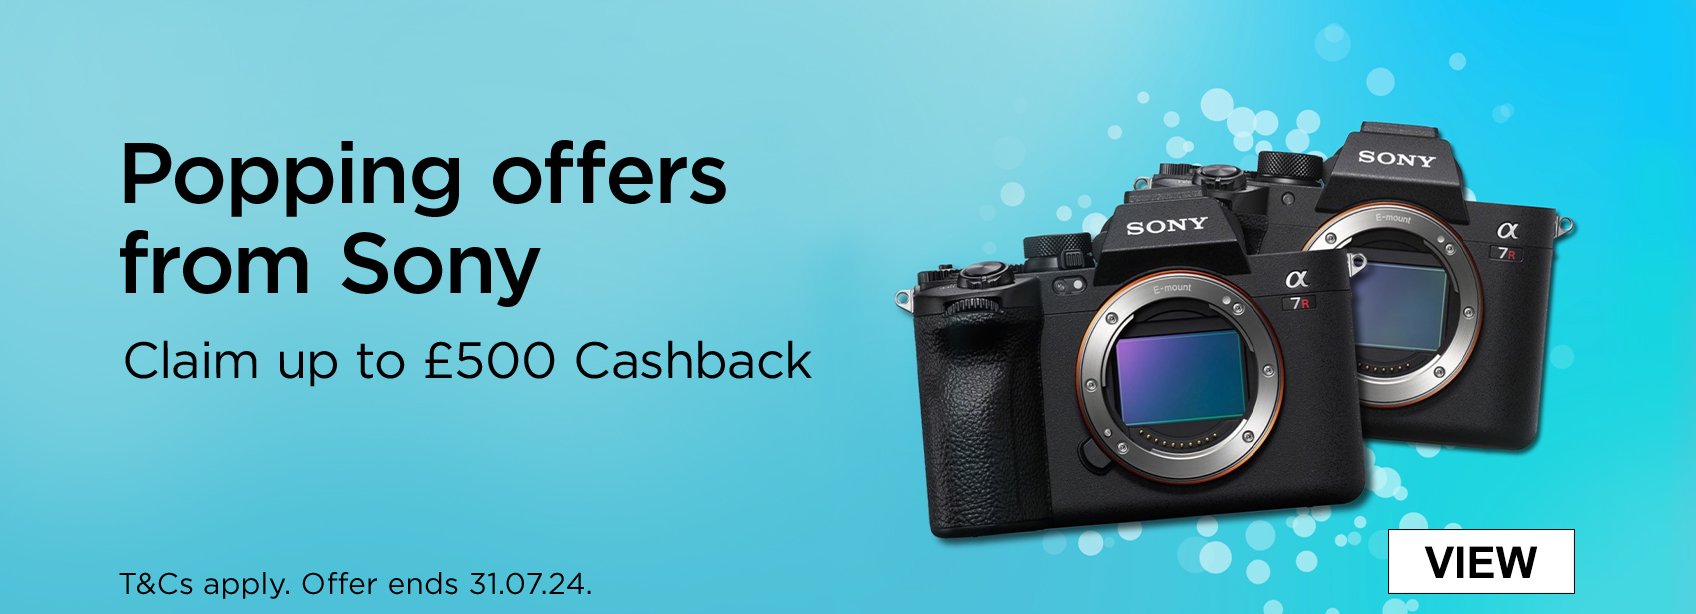 Popping offers from Sony Claim up to £500 Cashback. T&Cs apply. Offer ends 31.07.24